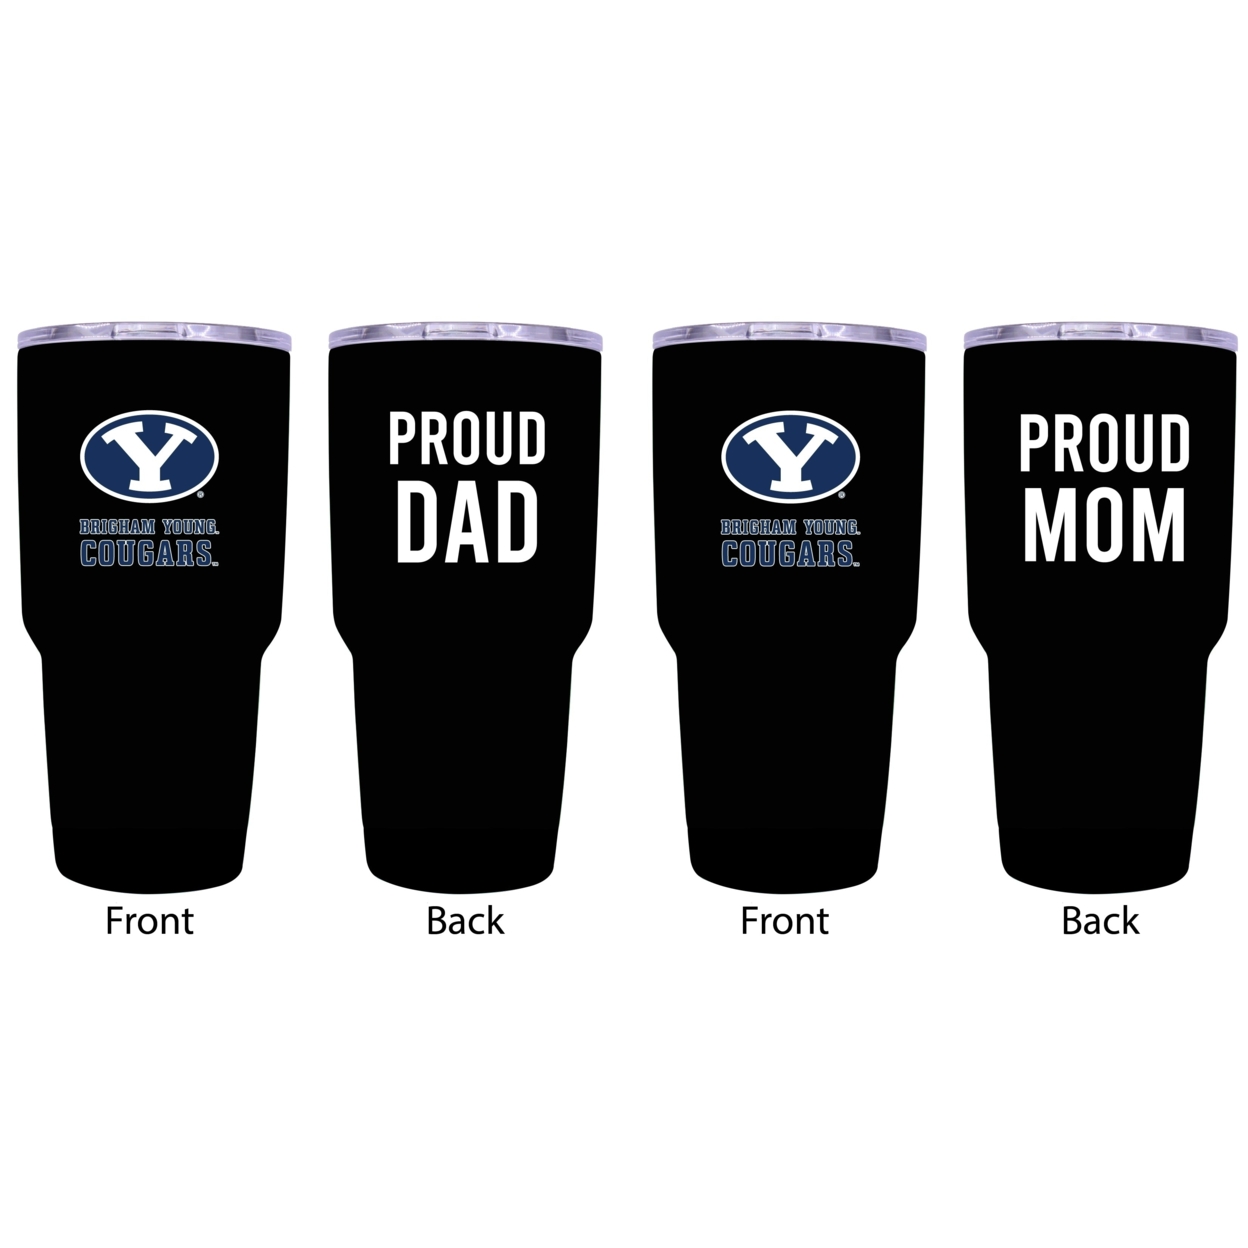 Brigham Young Cougars Proud Mom And Dad 24 Oz Insulated Stainless Steel Tumblers 2 Pack Black.